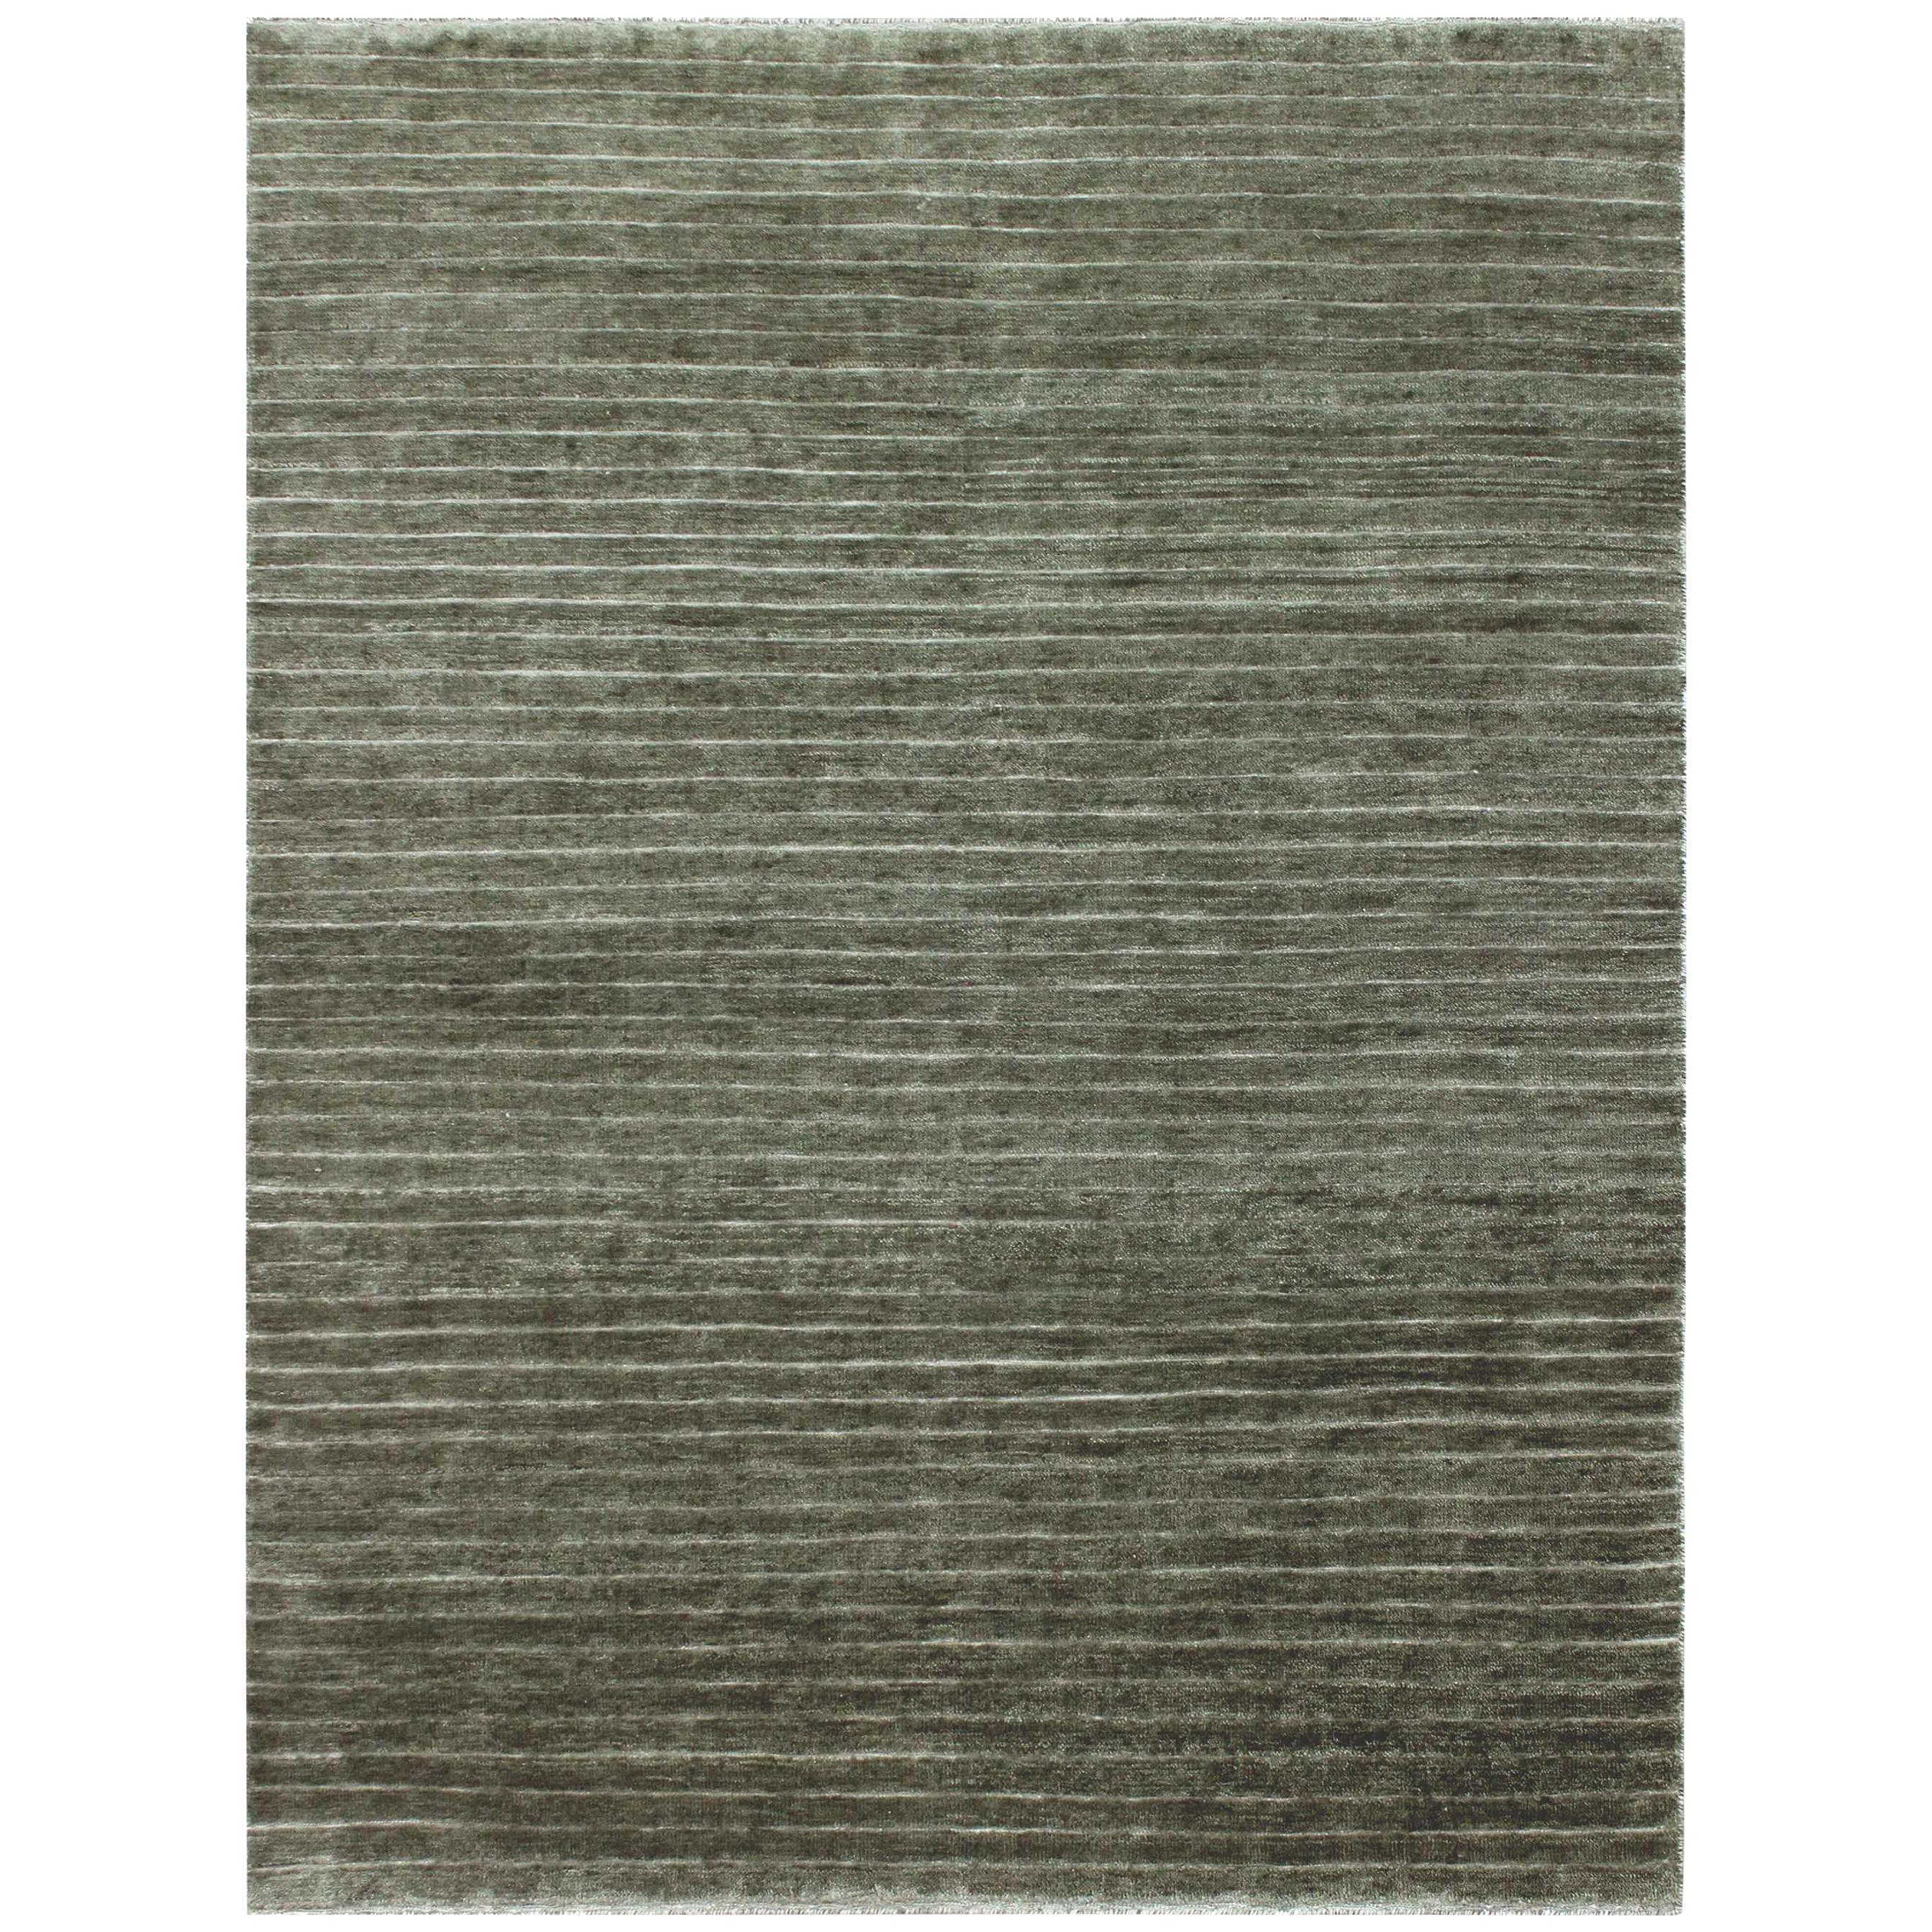 New Cameron Collection Area Rug with Modern Design Patterns and Colors For Sale